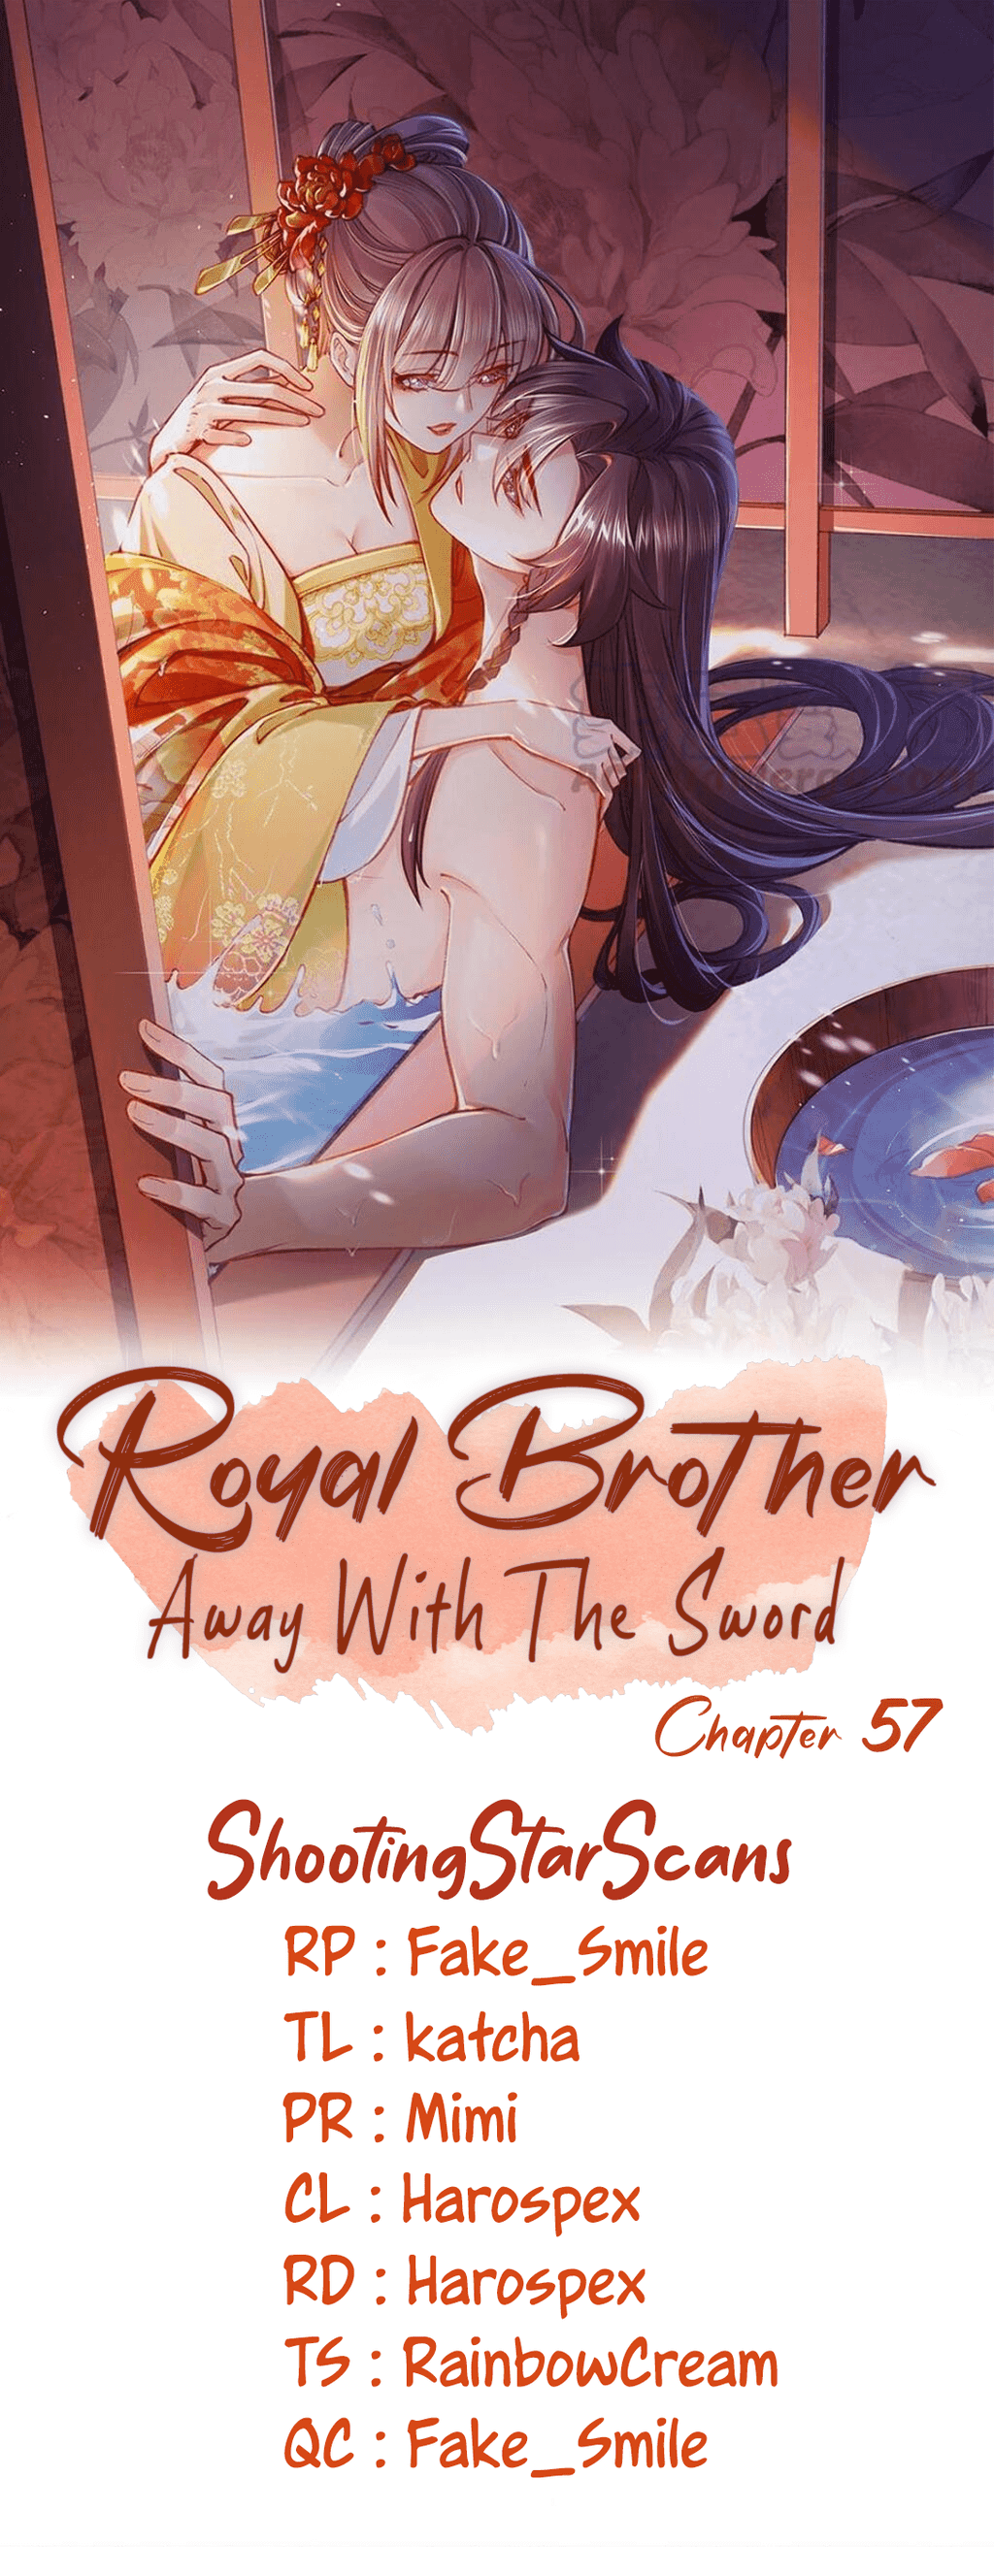 Royal Brother, Away With The Sword - Page 2